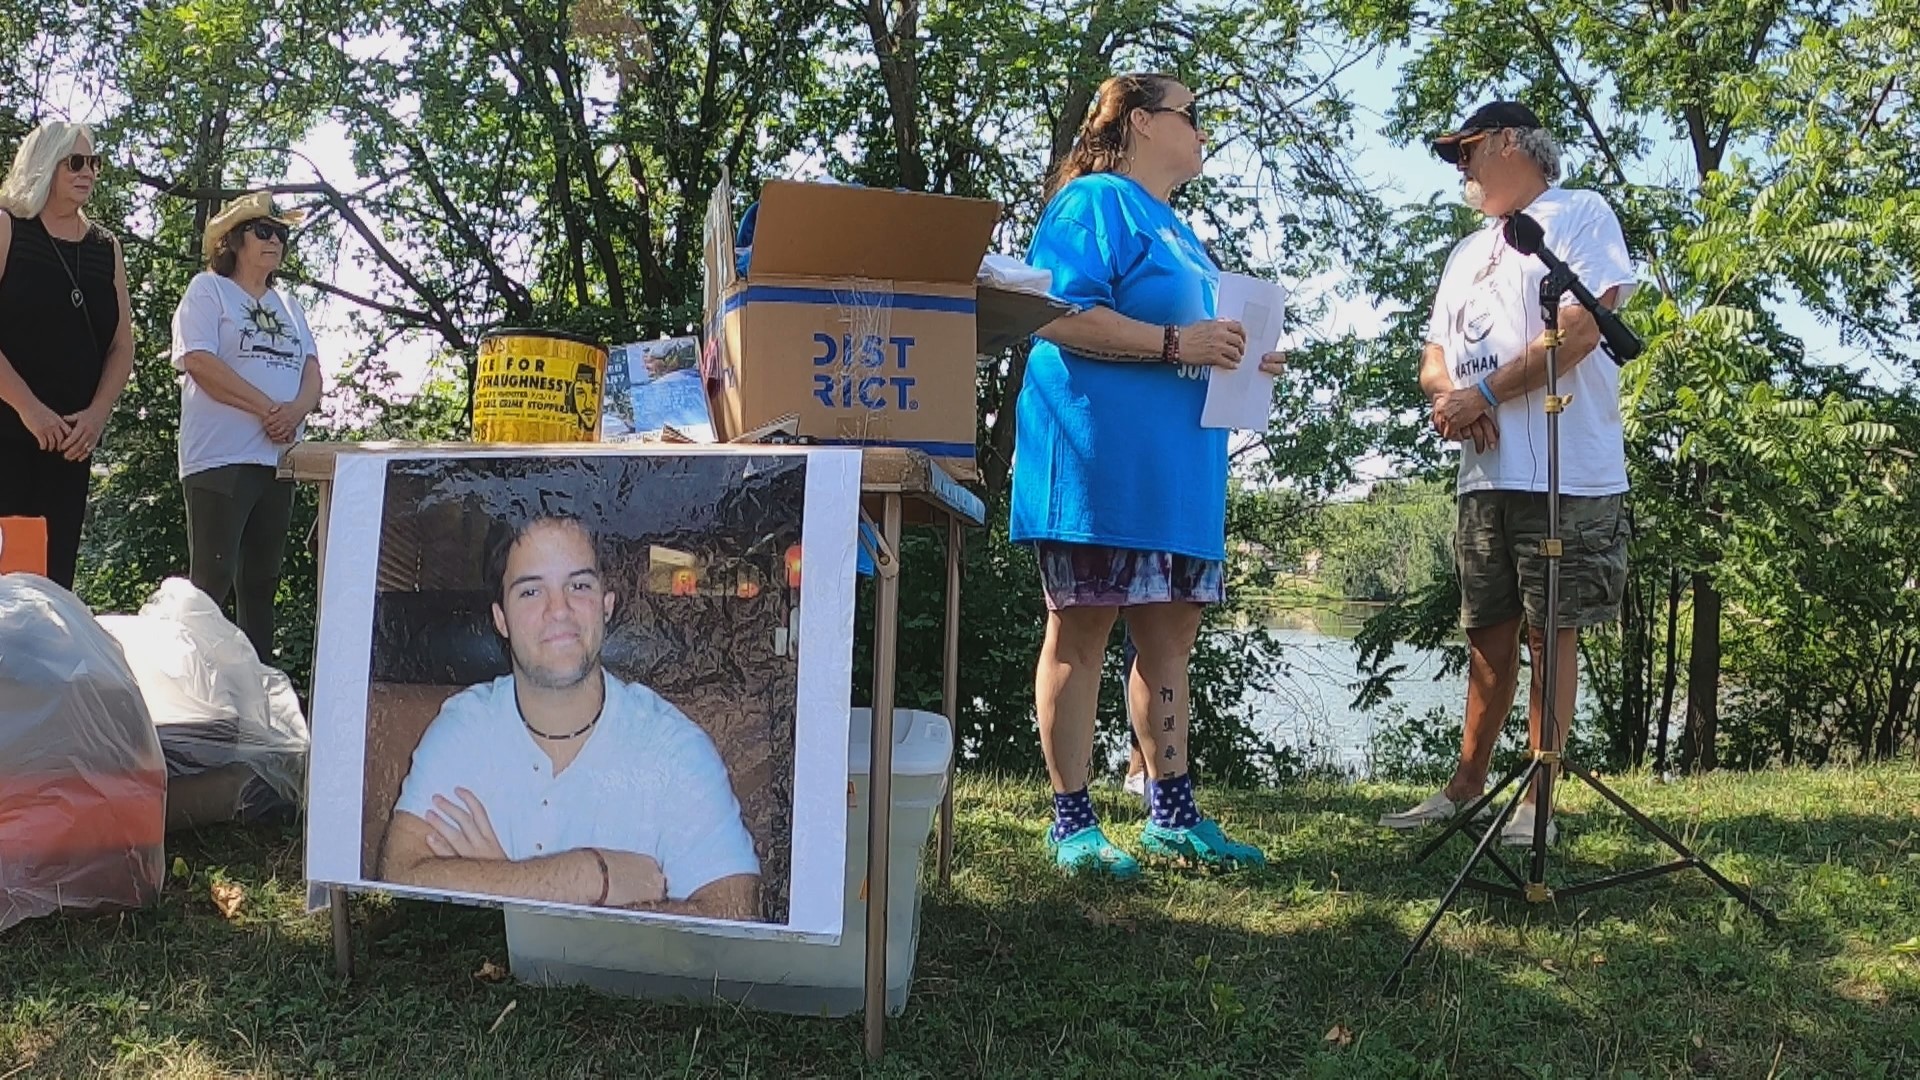 Friends and family of Jonathan O'Shaughnessy gathered Monday in Richfield to remember the 24-year-old who was killed six years ago on this day.